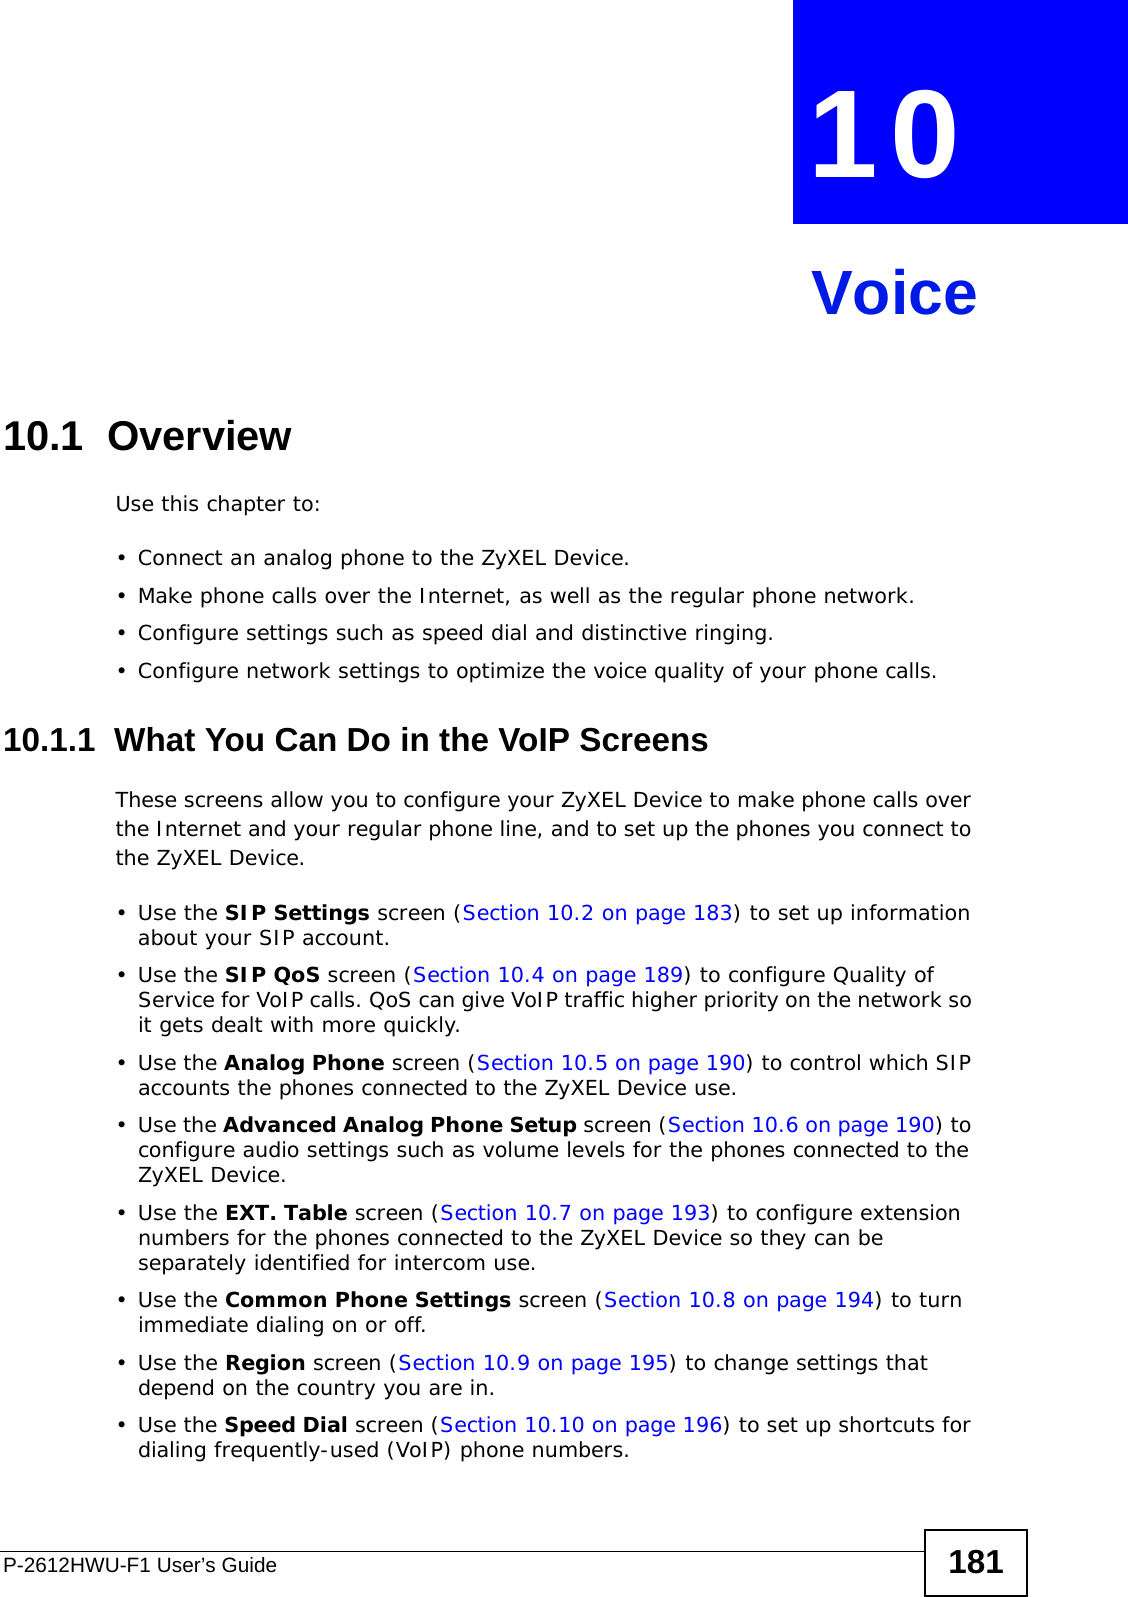 P-2612HWU-F1 User’s Guide 181CHAPTER  10 Voice10.1  OverviewUse this chapter to:• Connect an analog phone to the ZyXEL Device.• Make phone calls over the Internet, as well as the regular phone network.• Configure settings such as speed dial and distinctive ringing.• Configure network settings to optimize the voice quality of your phone calls.10.1.1  What You Can Do in the VoIP ScreensThese screens allow you to configure your ZyXEL Device to make phone calls over the Internet and your regular phone line, and to set up the phones you connect to the ZyXEL Device.•Use the SIP Settings screen (Section 10.2 on page 183) to set up information about your SIP account.•Use the SIP QoS screen (Section 10.4 on page 189) to configure Quality of Service for VoIP calls. QoS can give VoIP traffic higher priority on the network so it gets dealt with more quickly. •Use the Analog Phone screen (Section 10.5 on page 190) to control which SIP accounts the phones connected to the ZyXEL Device use.•Use the Advanced Analog Phone Setup screen (Section 10.6 on page 190) to configure audio settings such as volume levels for the phones connected to the ZyXEL Device.•Use the EXT. Table screen (Section 10.7 on page 193) to configure extension numbers for the phones connected to the ZyXEL Device so they can be separately identified for intercom use. •Use the Common Phone Settings screen (Section 10.8 on page 194) to turn immediate dialing on or off.•Use the Region screen (Section 10.9 on page 195) to change settings that depend on the country you are in.•Use the Speed Dial screen (Section 10.10 on page 196) to set up shortcuts for dialing frequently-used (VoIP) phone numbers.